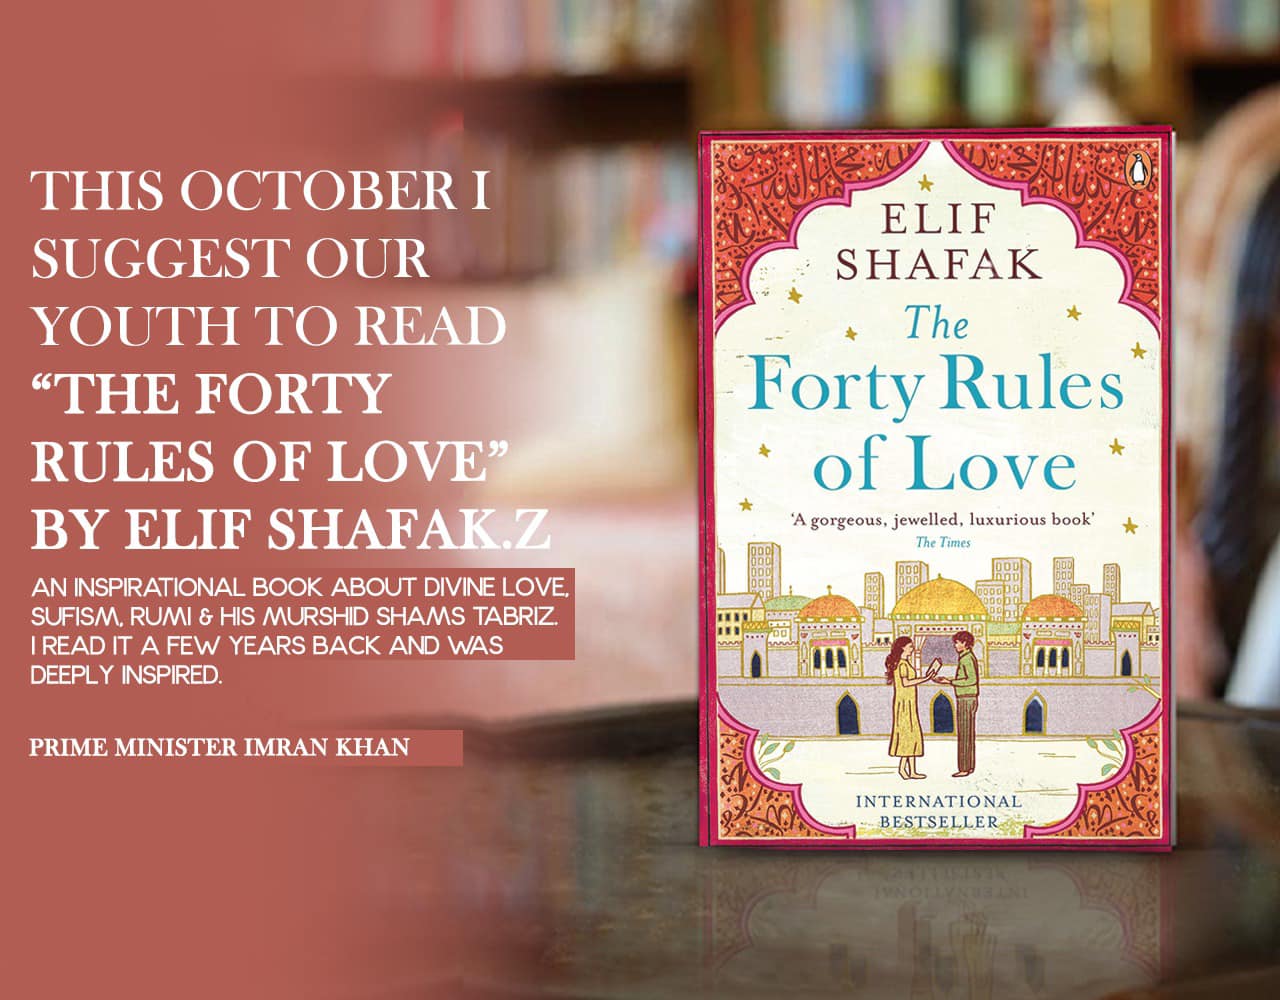 You must have been wondering about what is Forty Rules of Love as per the Prime Minister Imran Khan? For the month of October, PM Imran Khan has recommended to read the book "The Forty Rules of Love". He has also explained the reason of recommending this book to read. Check out the details we have got here for all of you!